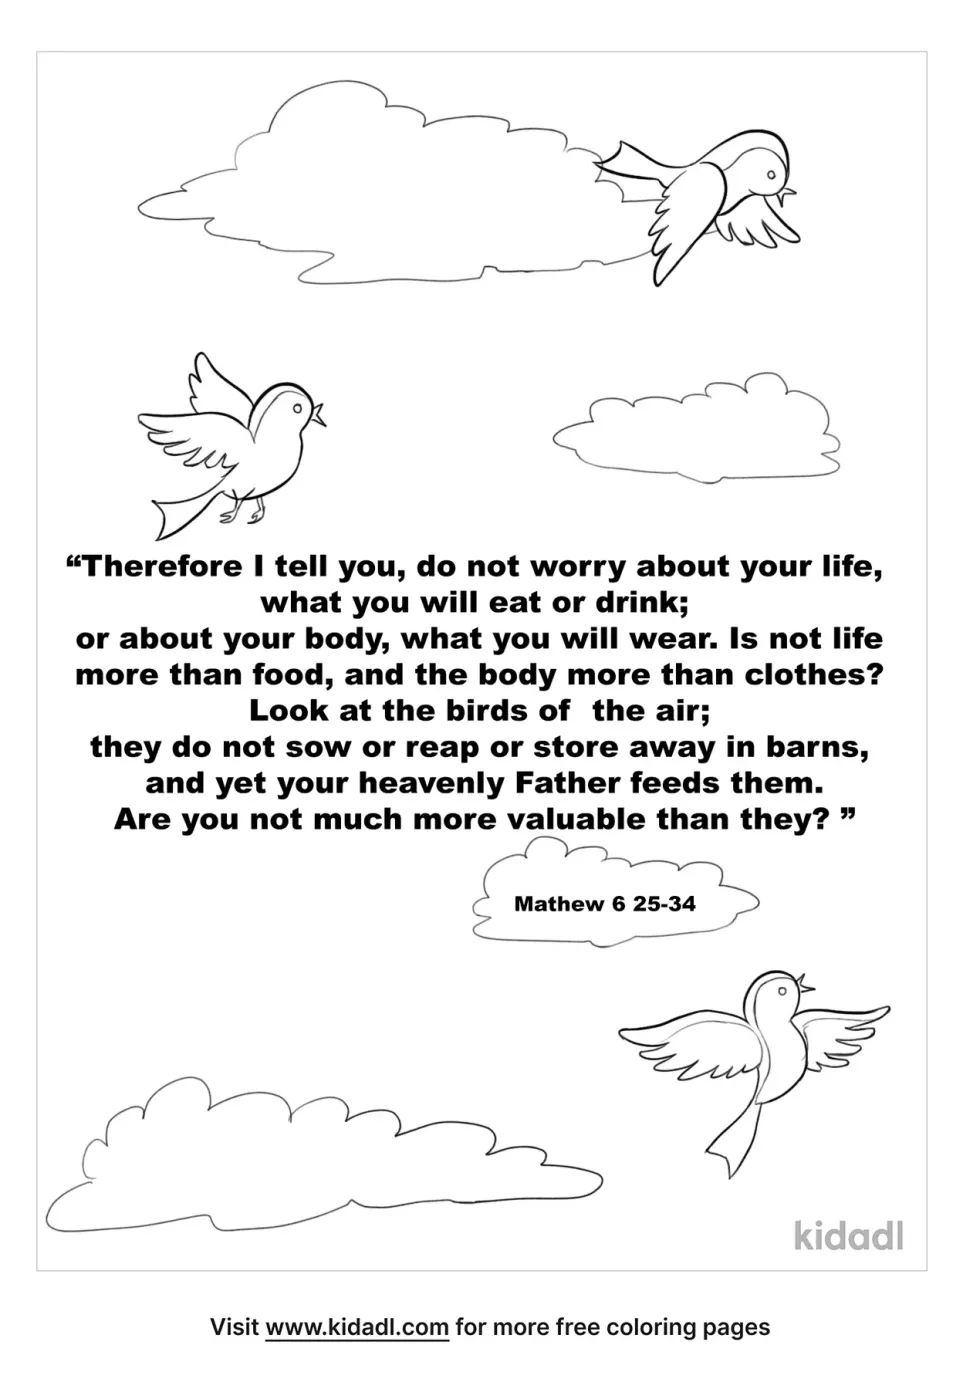 Matthew 6 25-34 Coloring Page